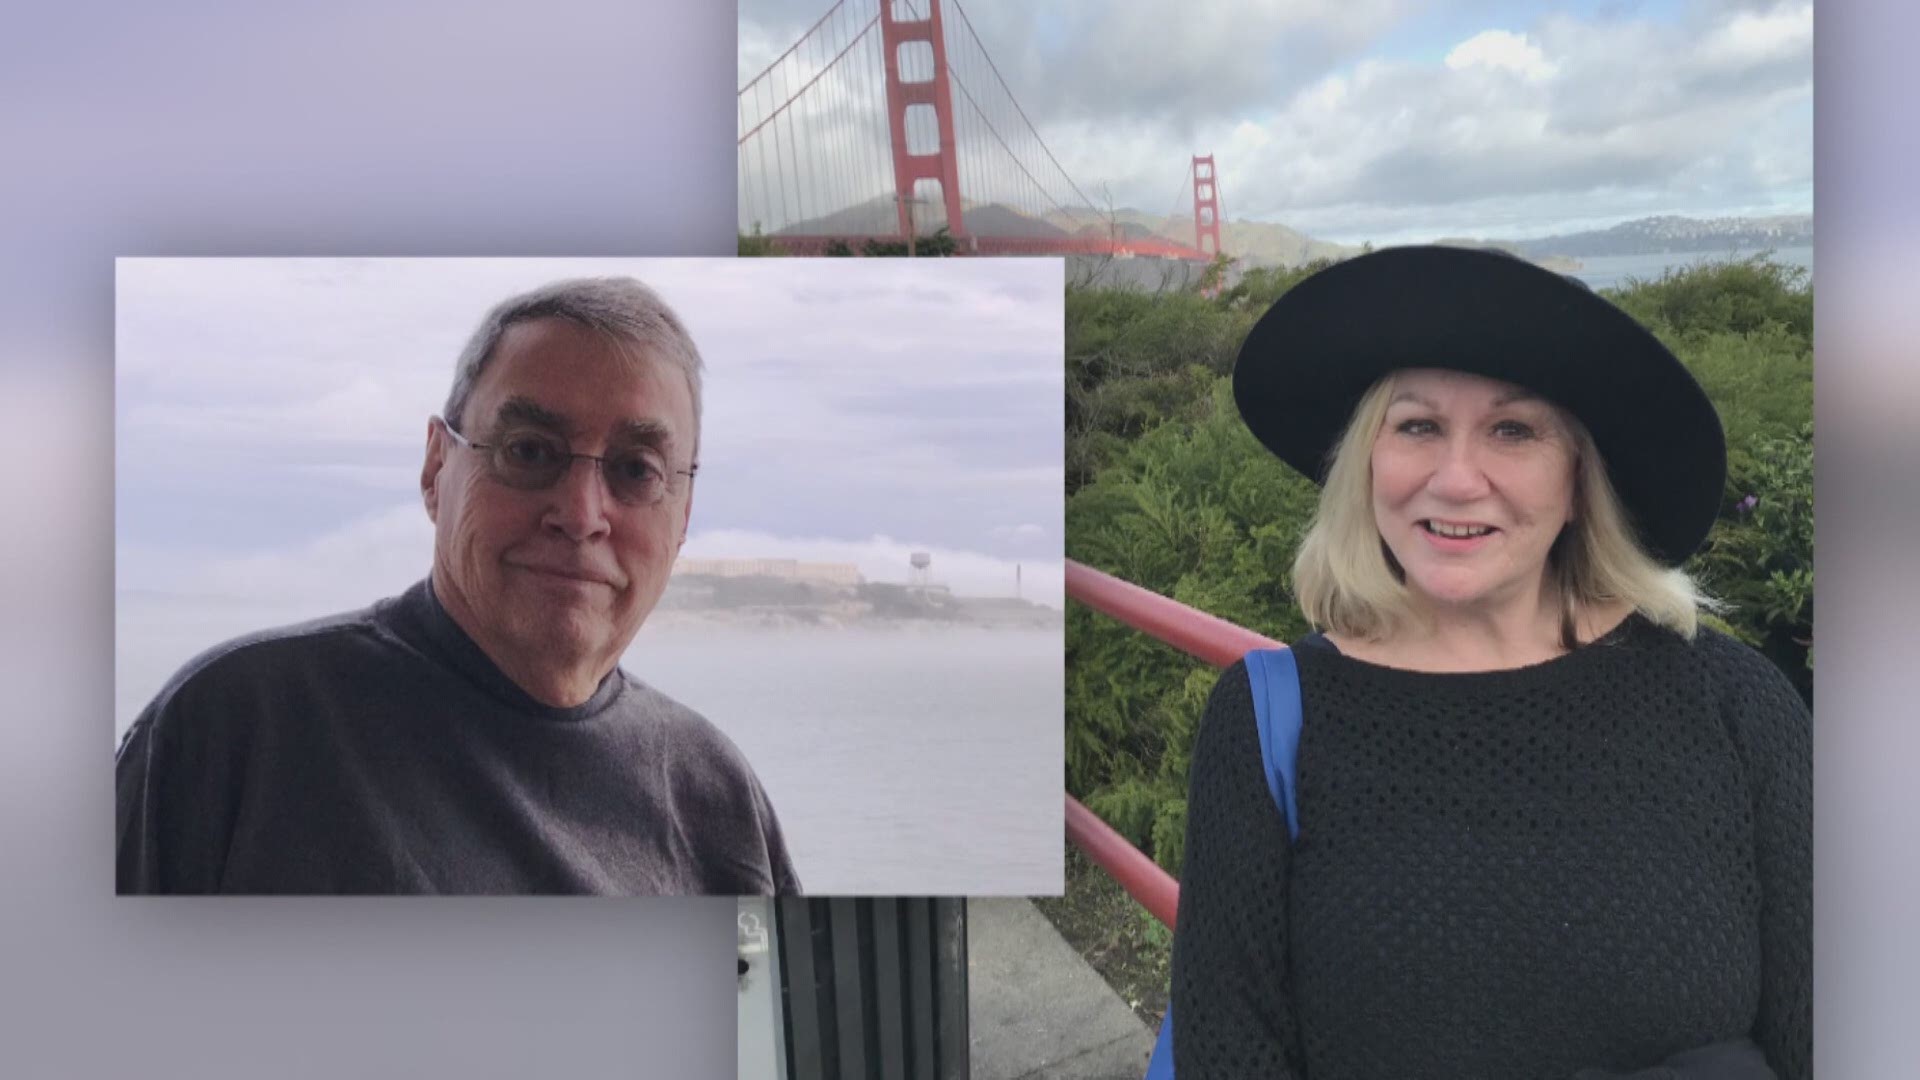 Retired Superior Court Judge Hockett and his wife have good news to report.  They received a refund after COVID abruptly ended their cruise of a lifetime.